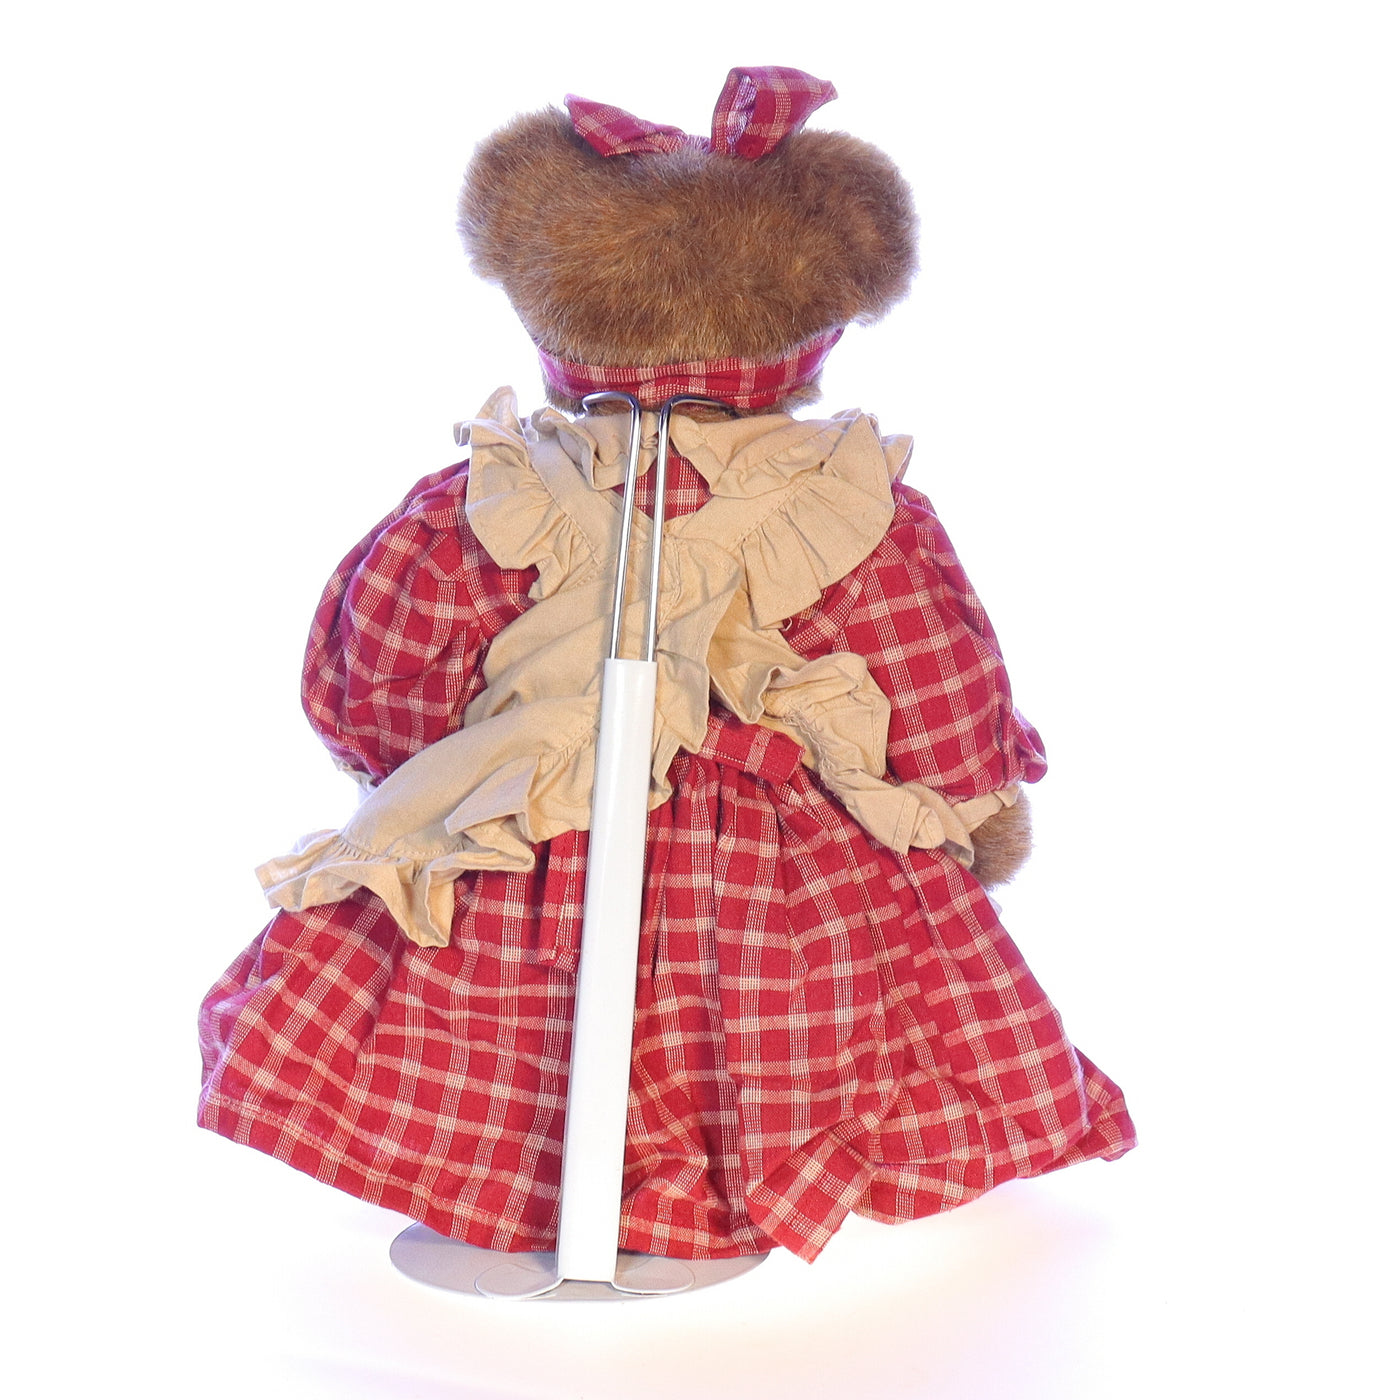 Boyds Bears Collection Plush with Tags The Archive Collection 912052 1990 12"